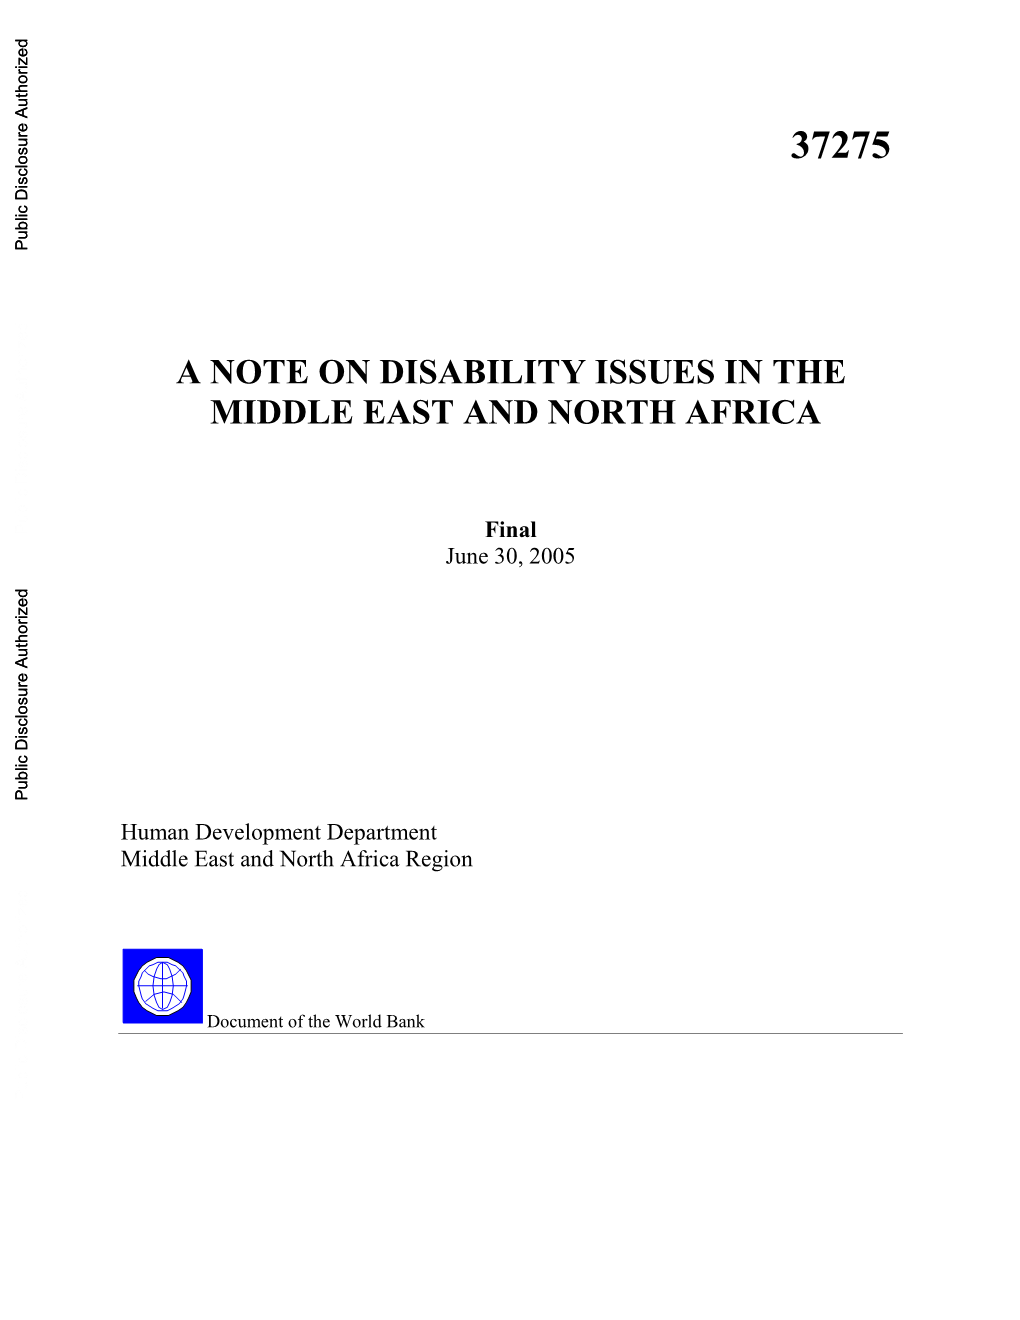 A Note on Disability Issues in the Middle East and North Africa